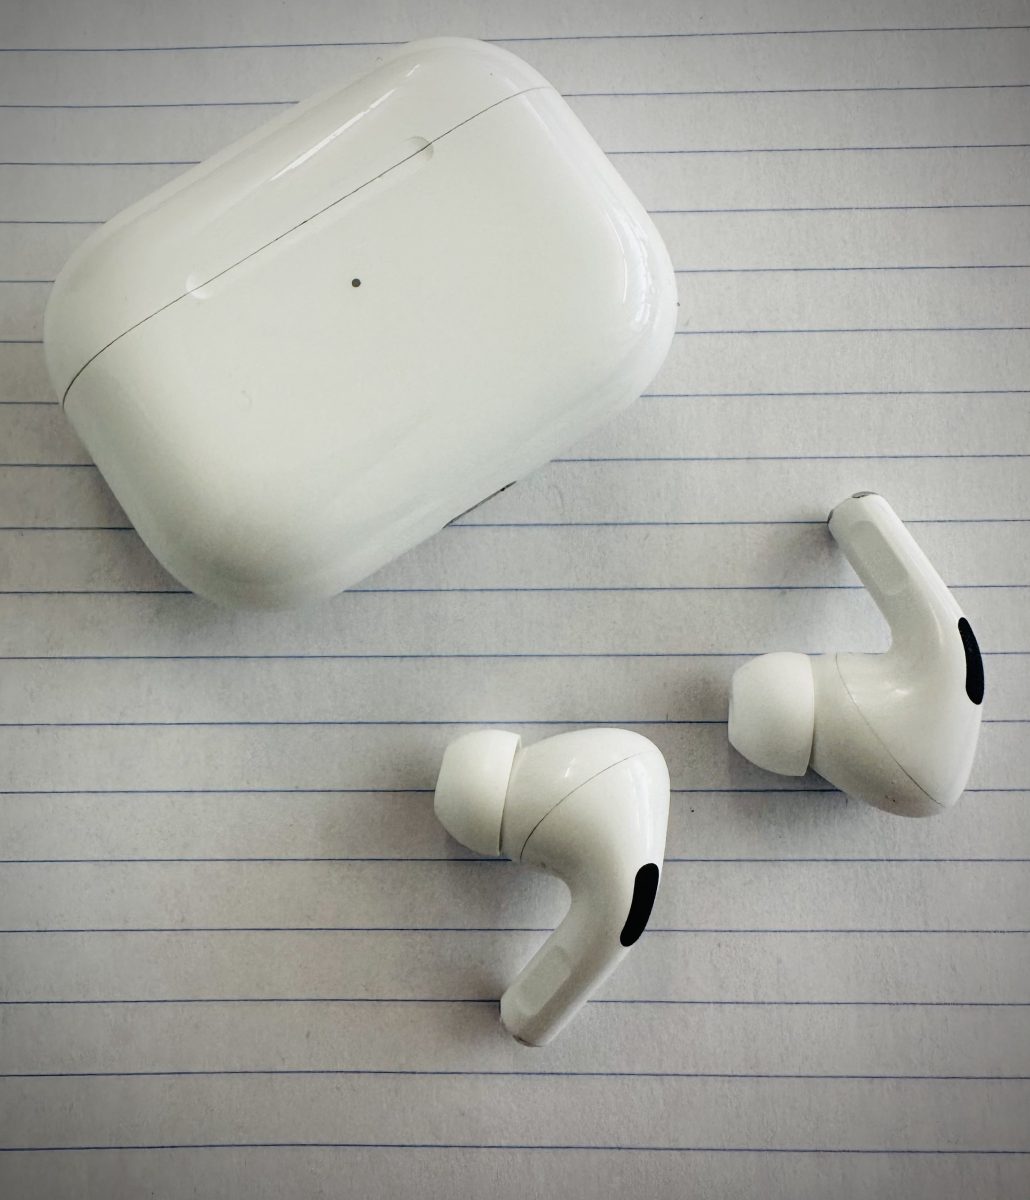 Students and faculty remain divided over student use of AirPods.